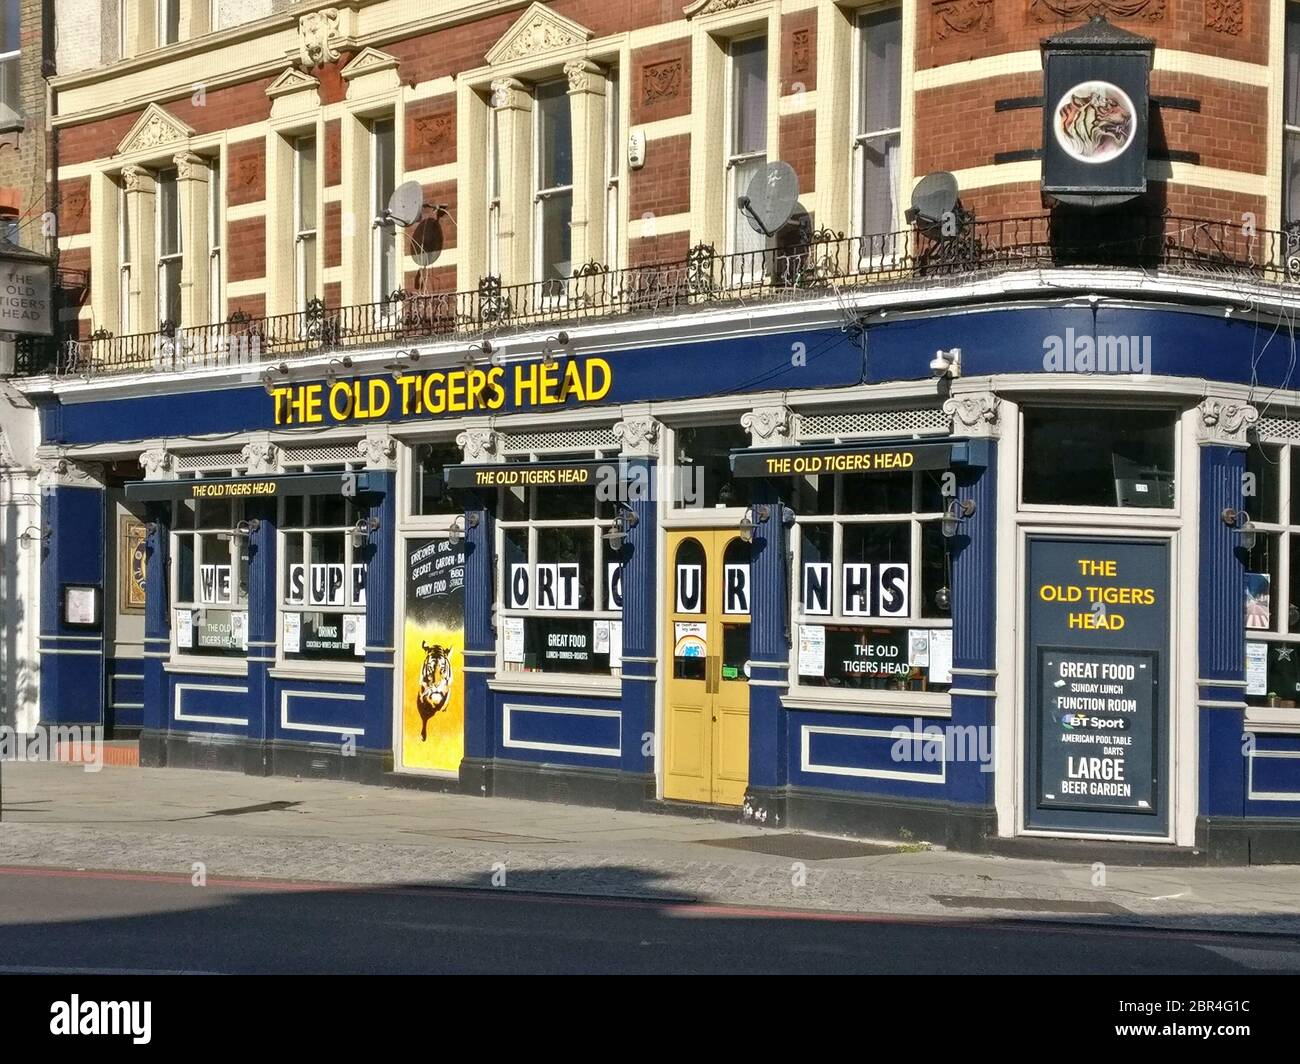 London, United Kingdom - April 20, 2020: WE SUPPORT OUR NHS signs on windows of The Old Tigers Head pub. Most bars and restaurants are closed during c Stock Photo